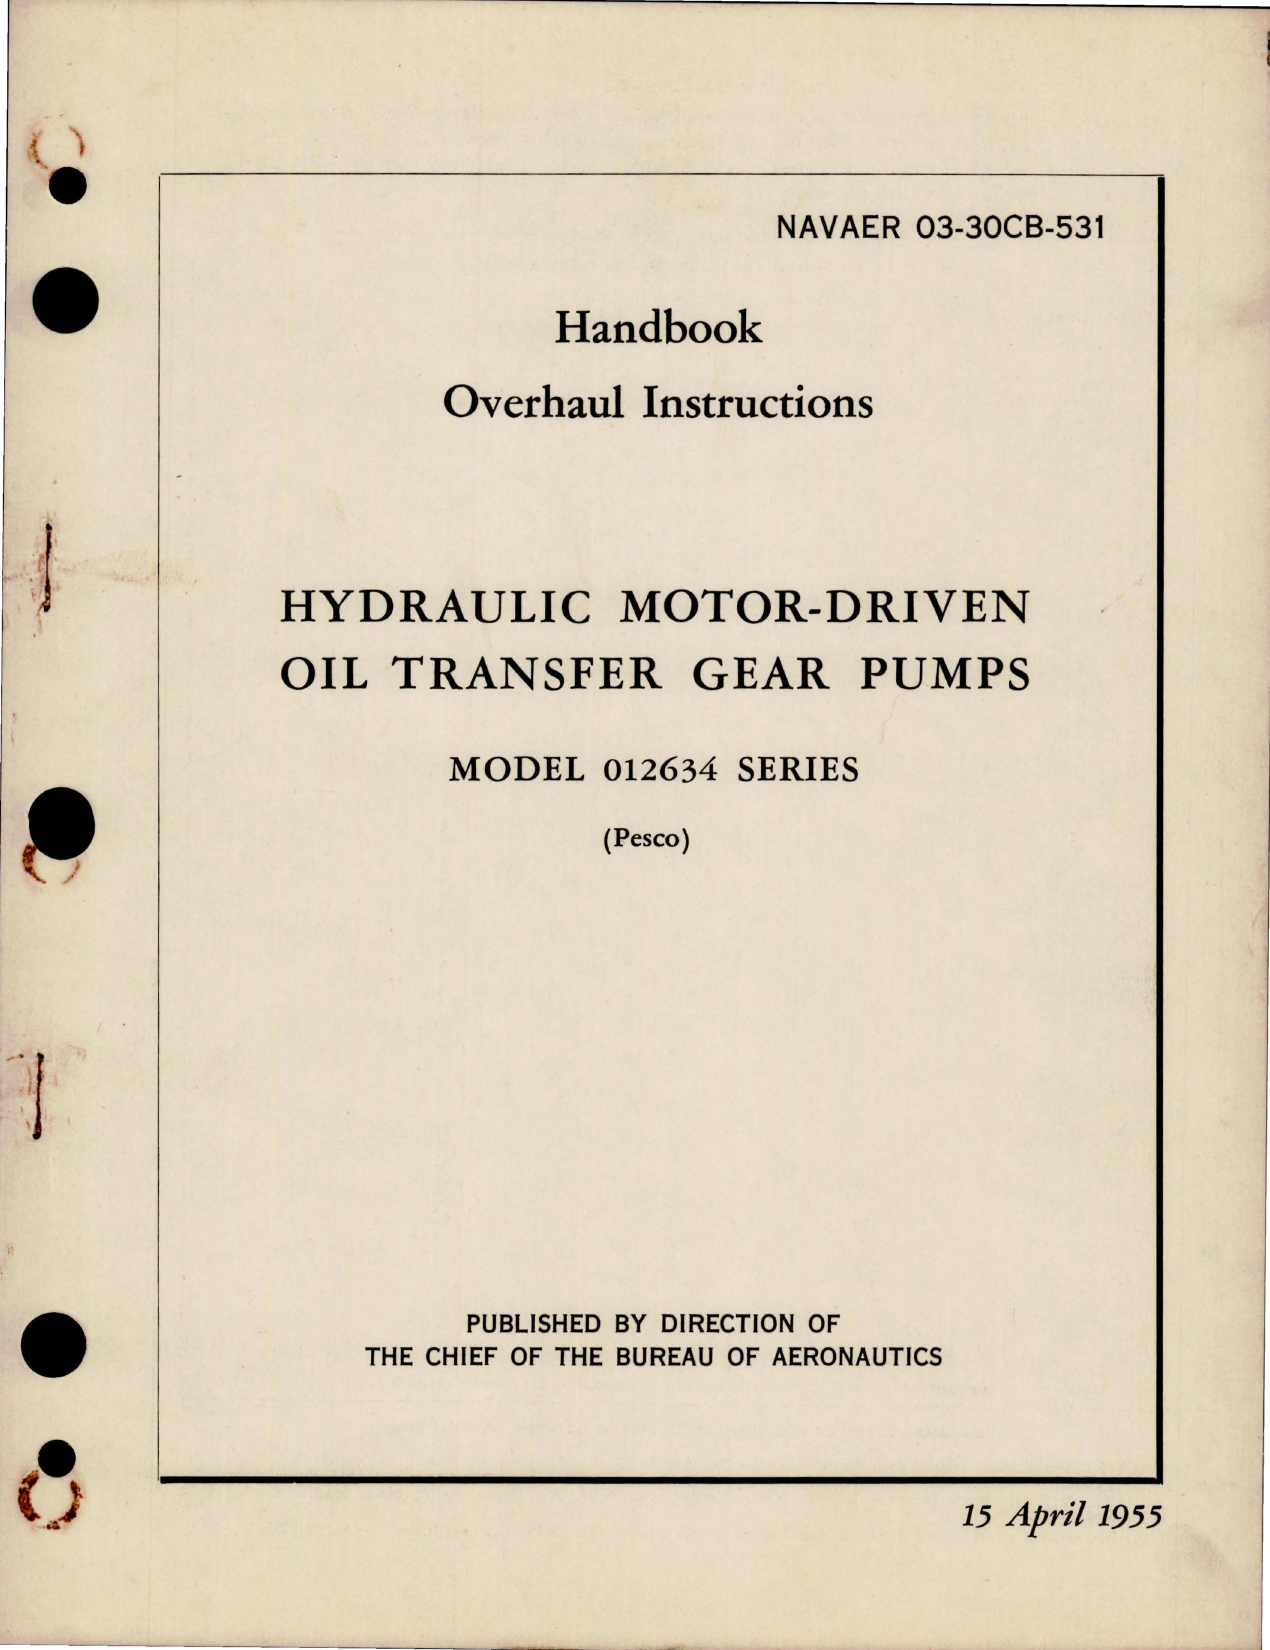 Sample page 1 from AirCorps Library document: Overhaul Instructions for Hydraulic Motor Driven Oil Transfer Gear Pumps - Model 012634 Series 